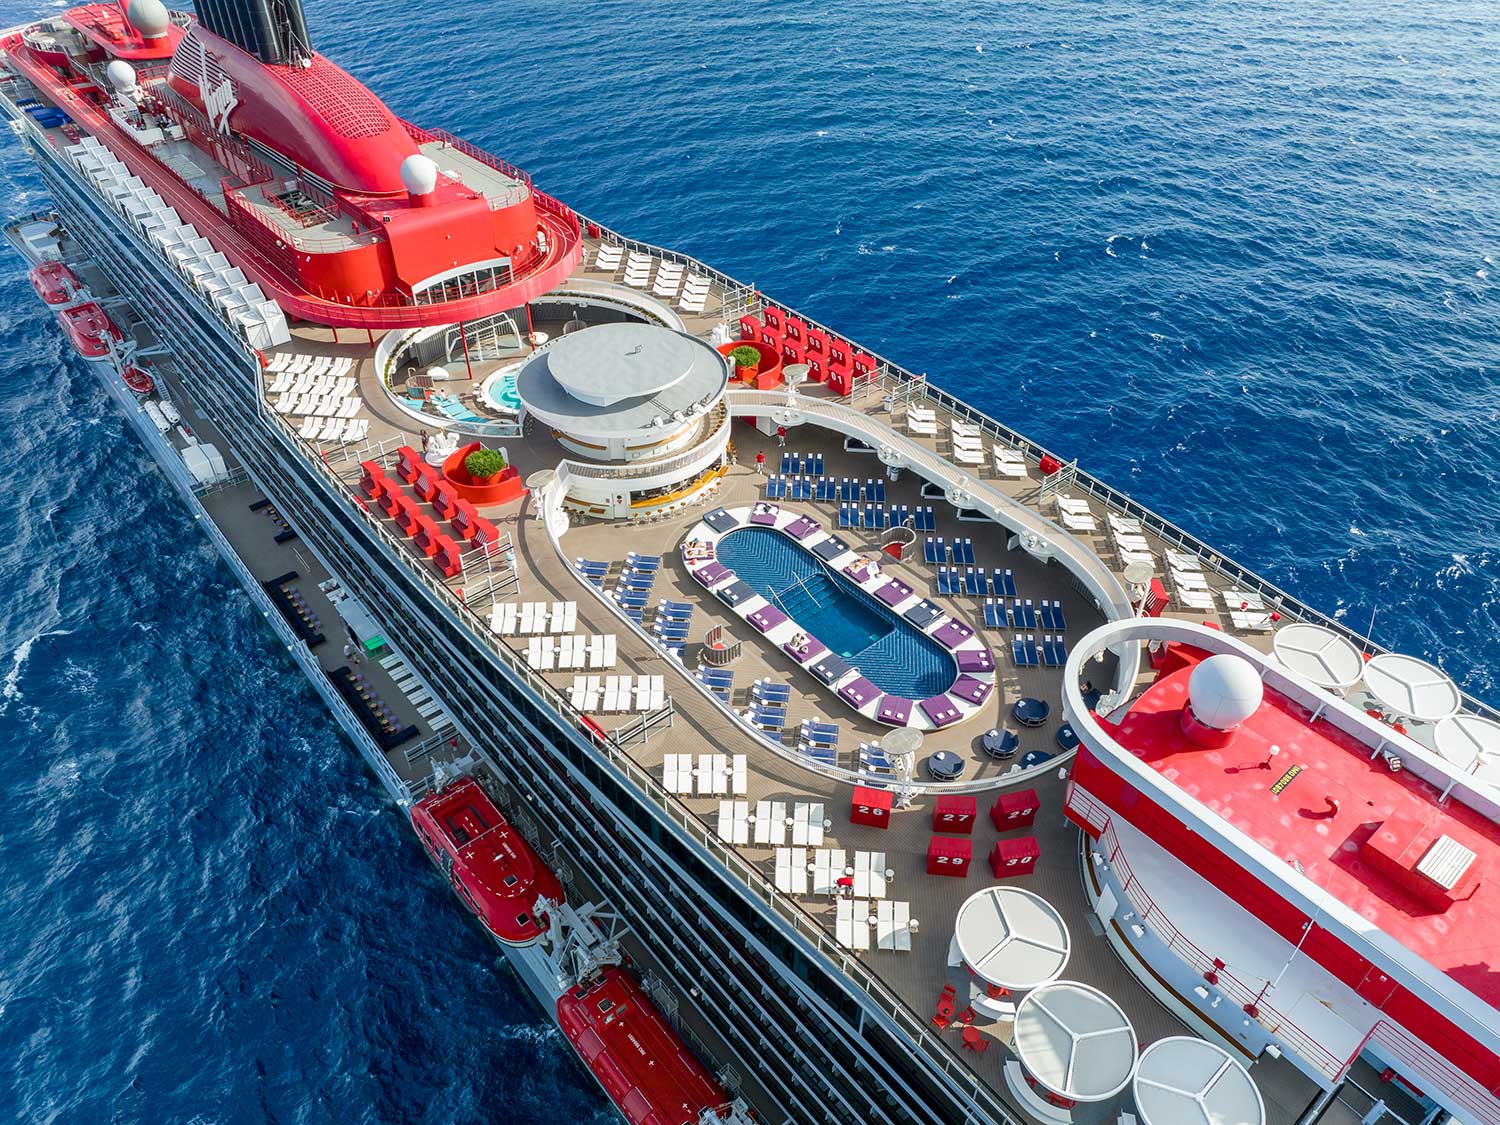 An aerial view of one of the pools and top deck seating on the Virgin Voyages Valiant Lady.